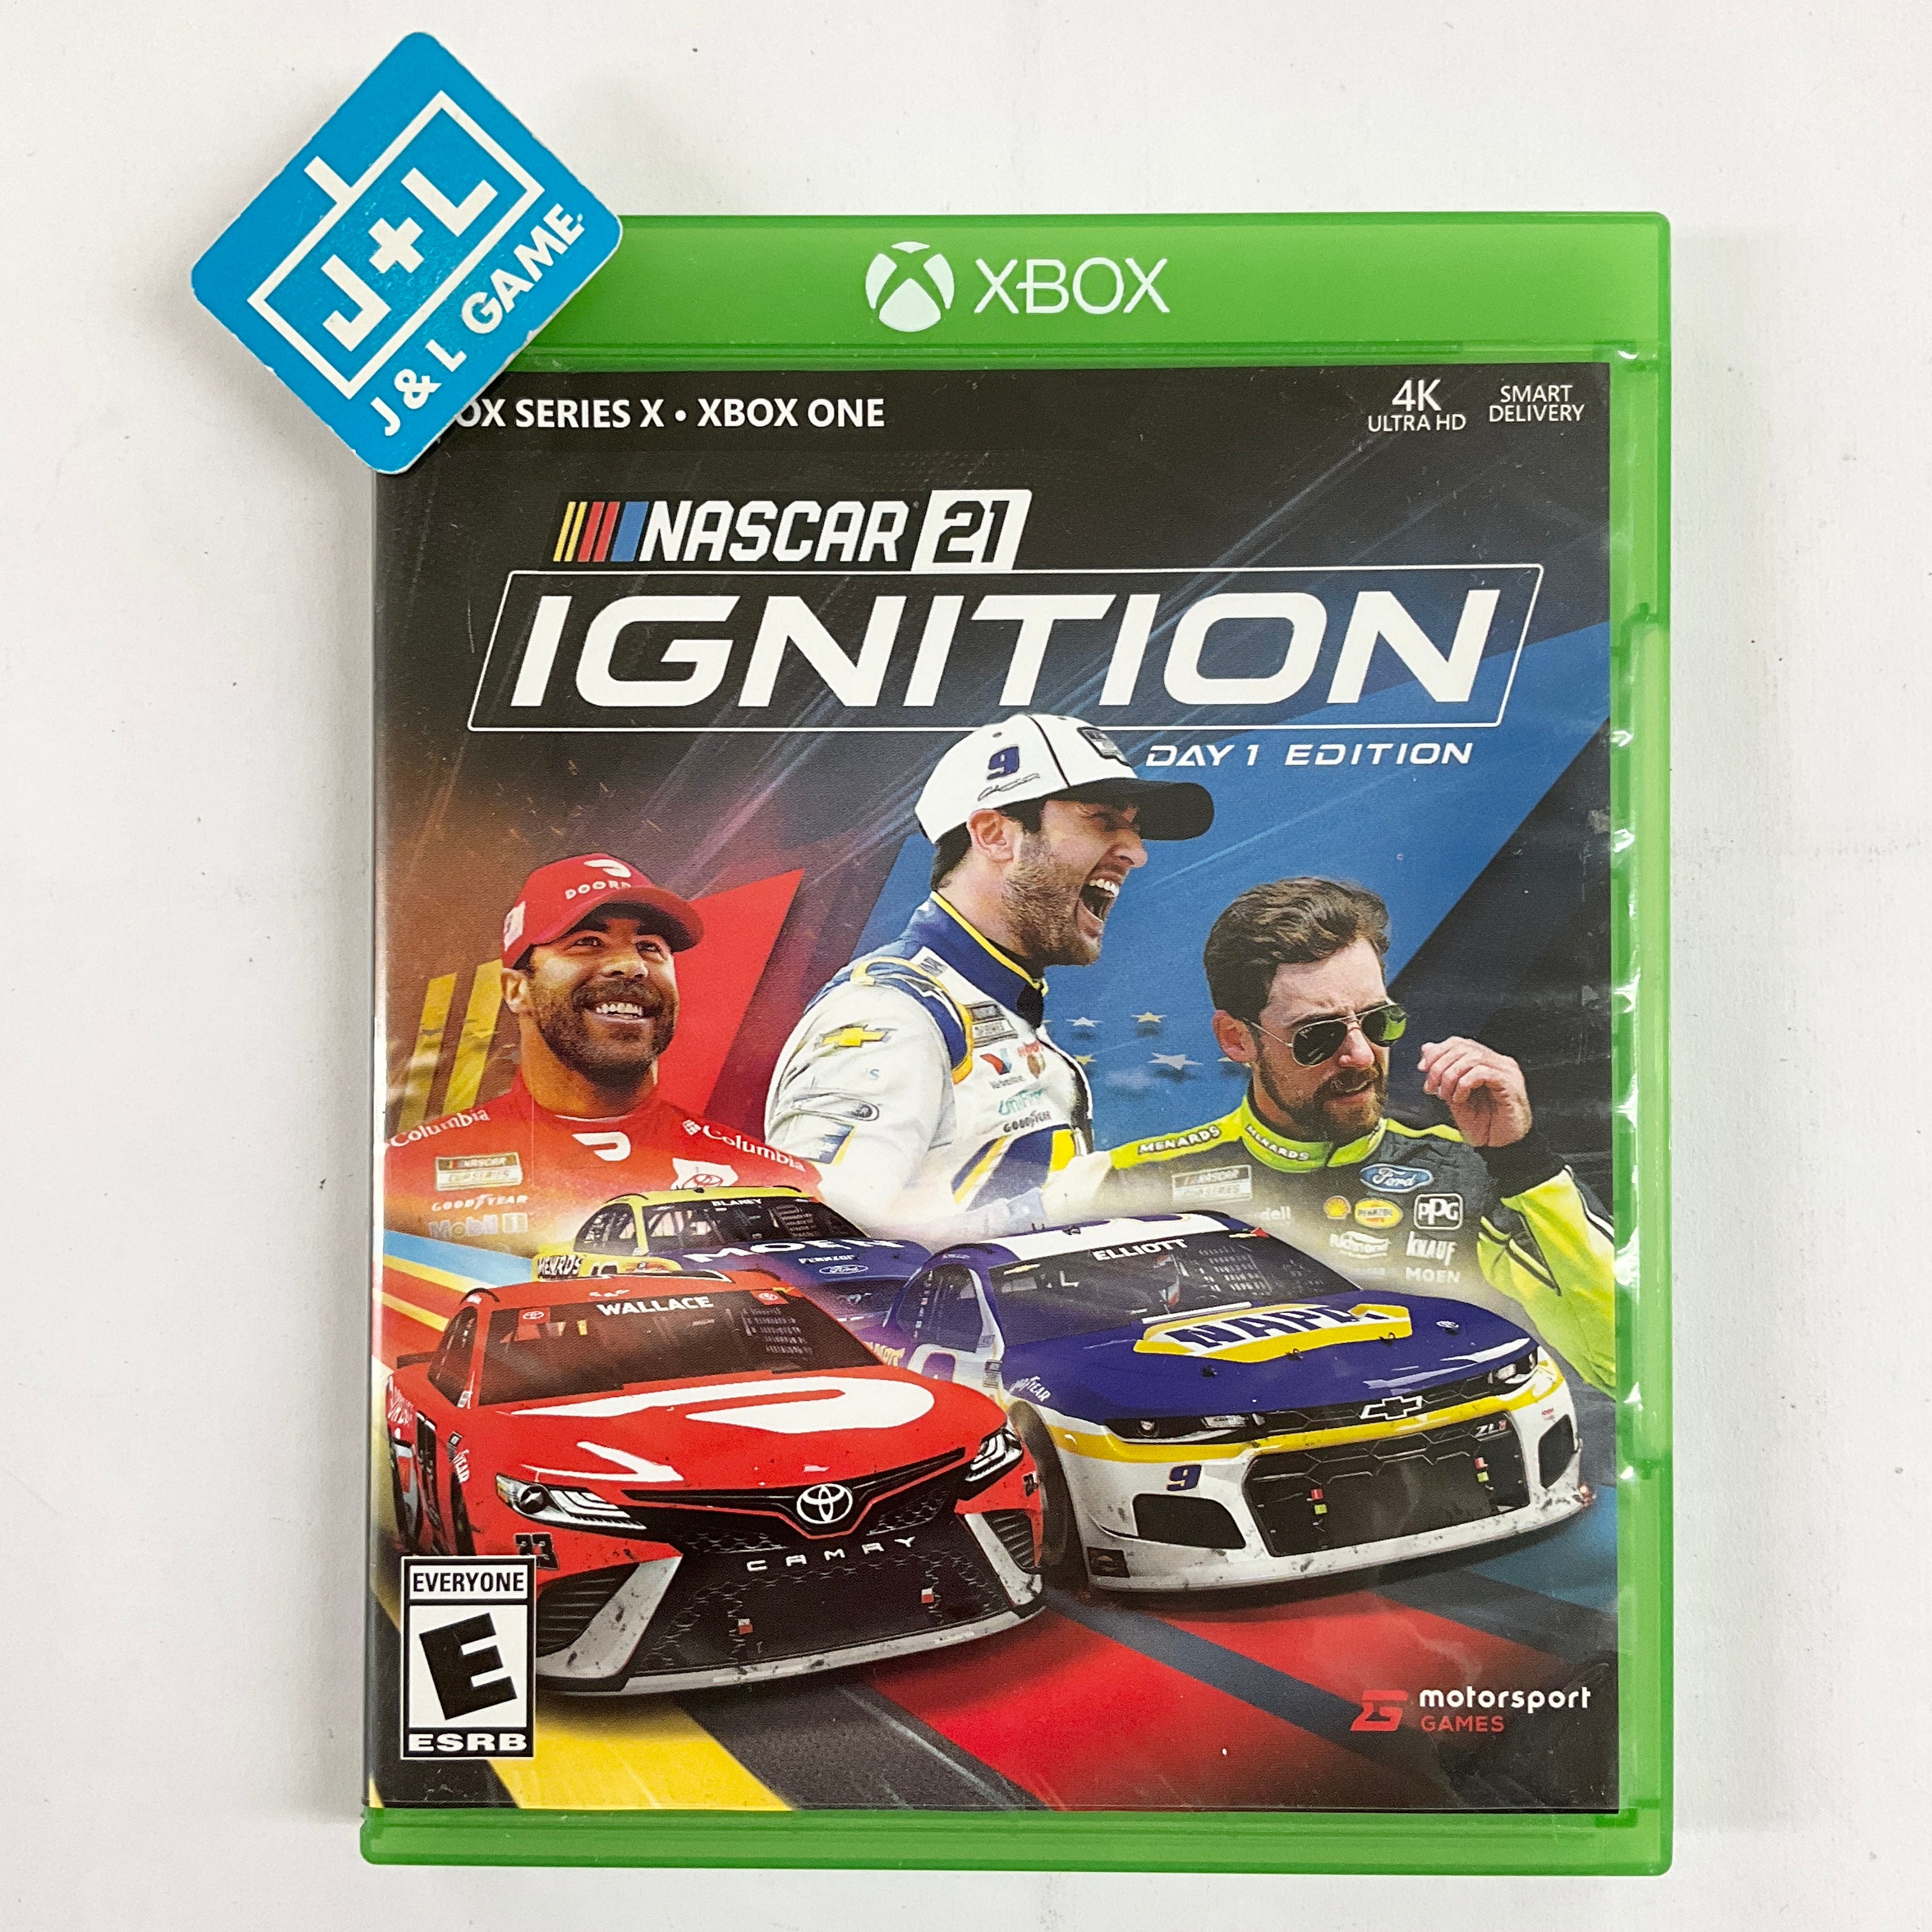 NASCAR 21: Ignition - Day 1 Edition - (XB1) Xbox One [Pre-Owned] Video Games Motorsport Games   